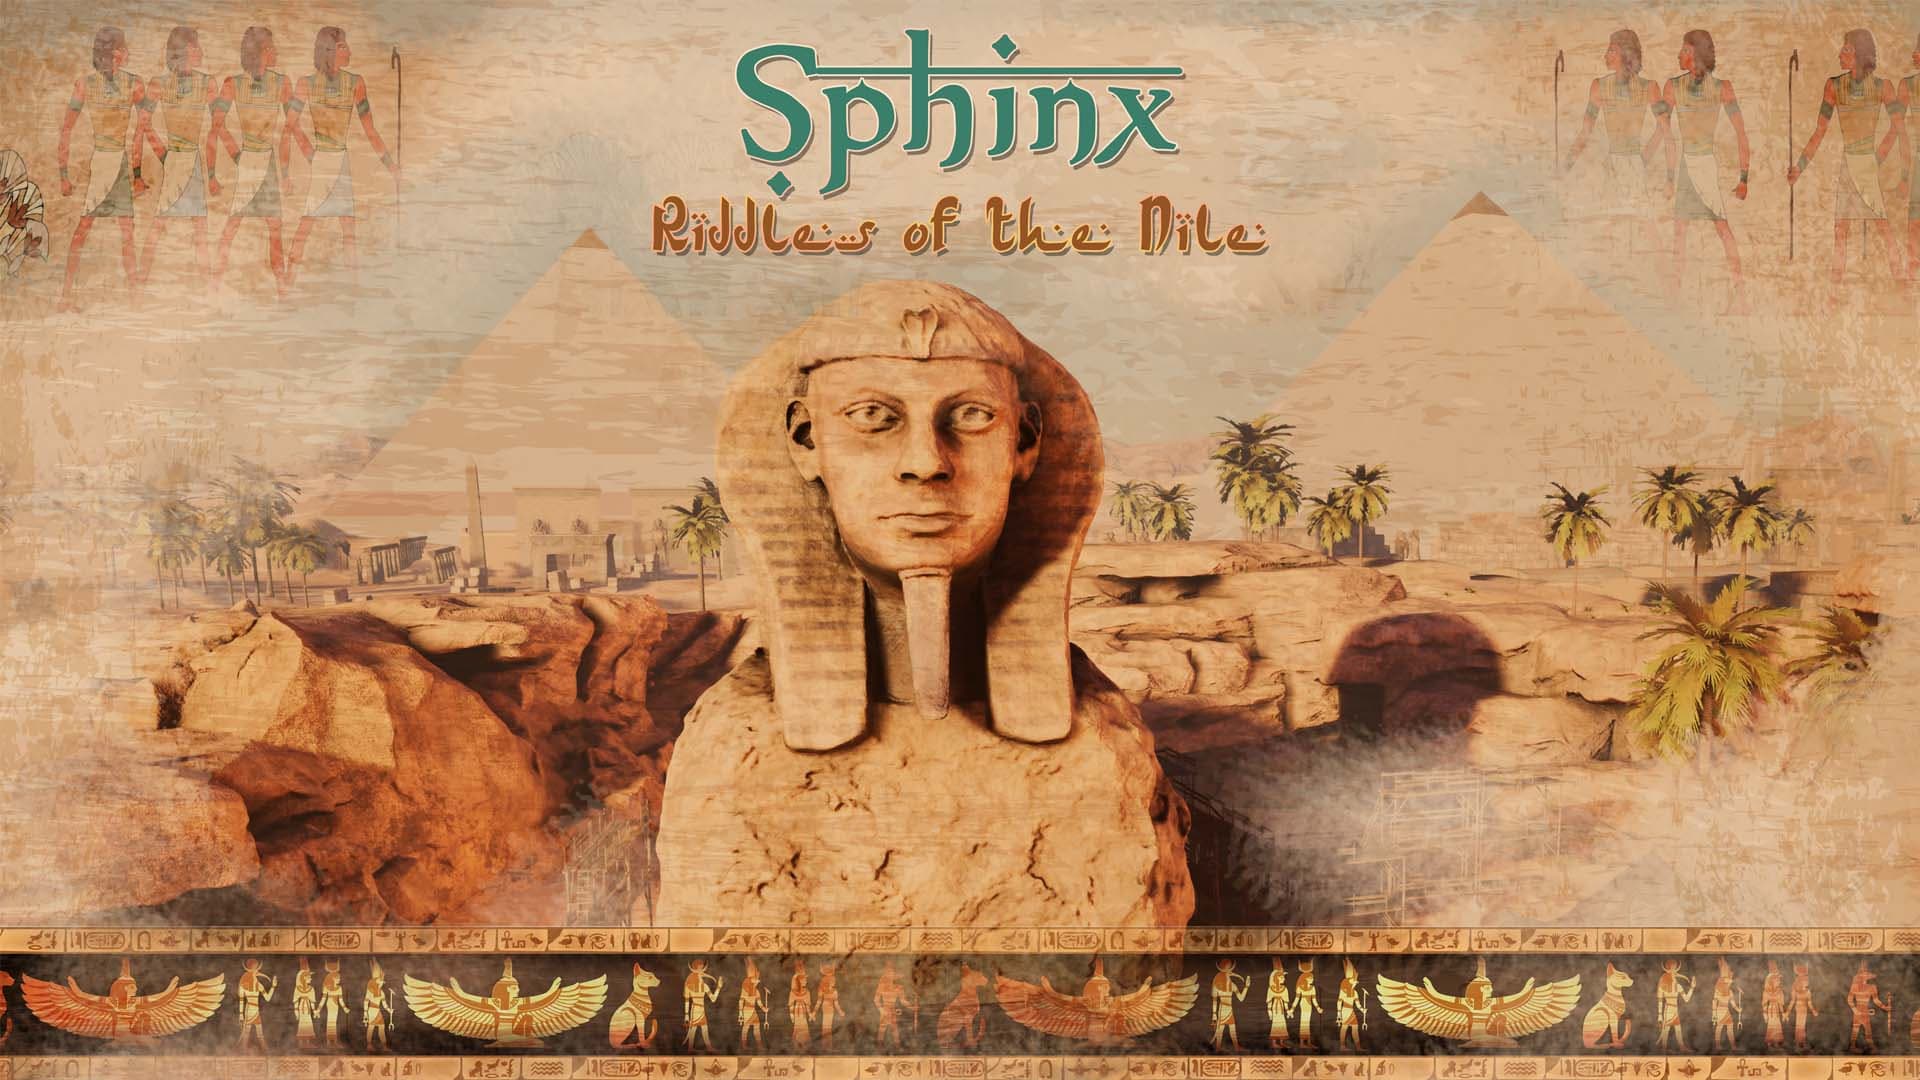 Sphinx - Riddles of the Nile 1